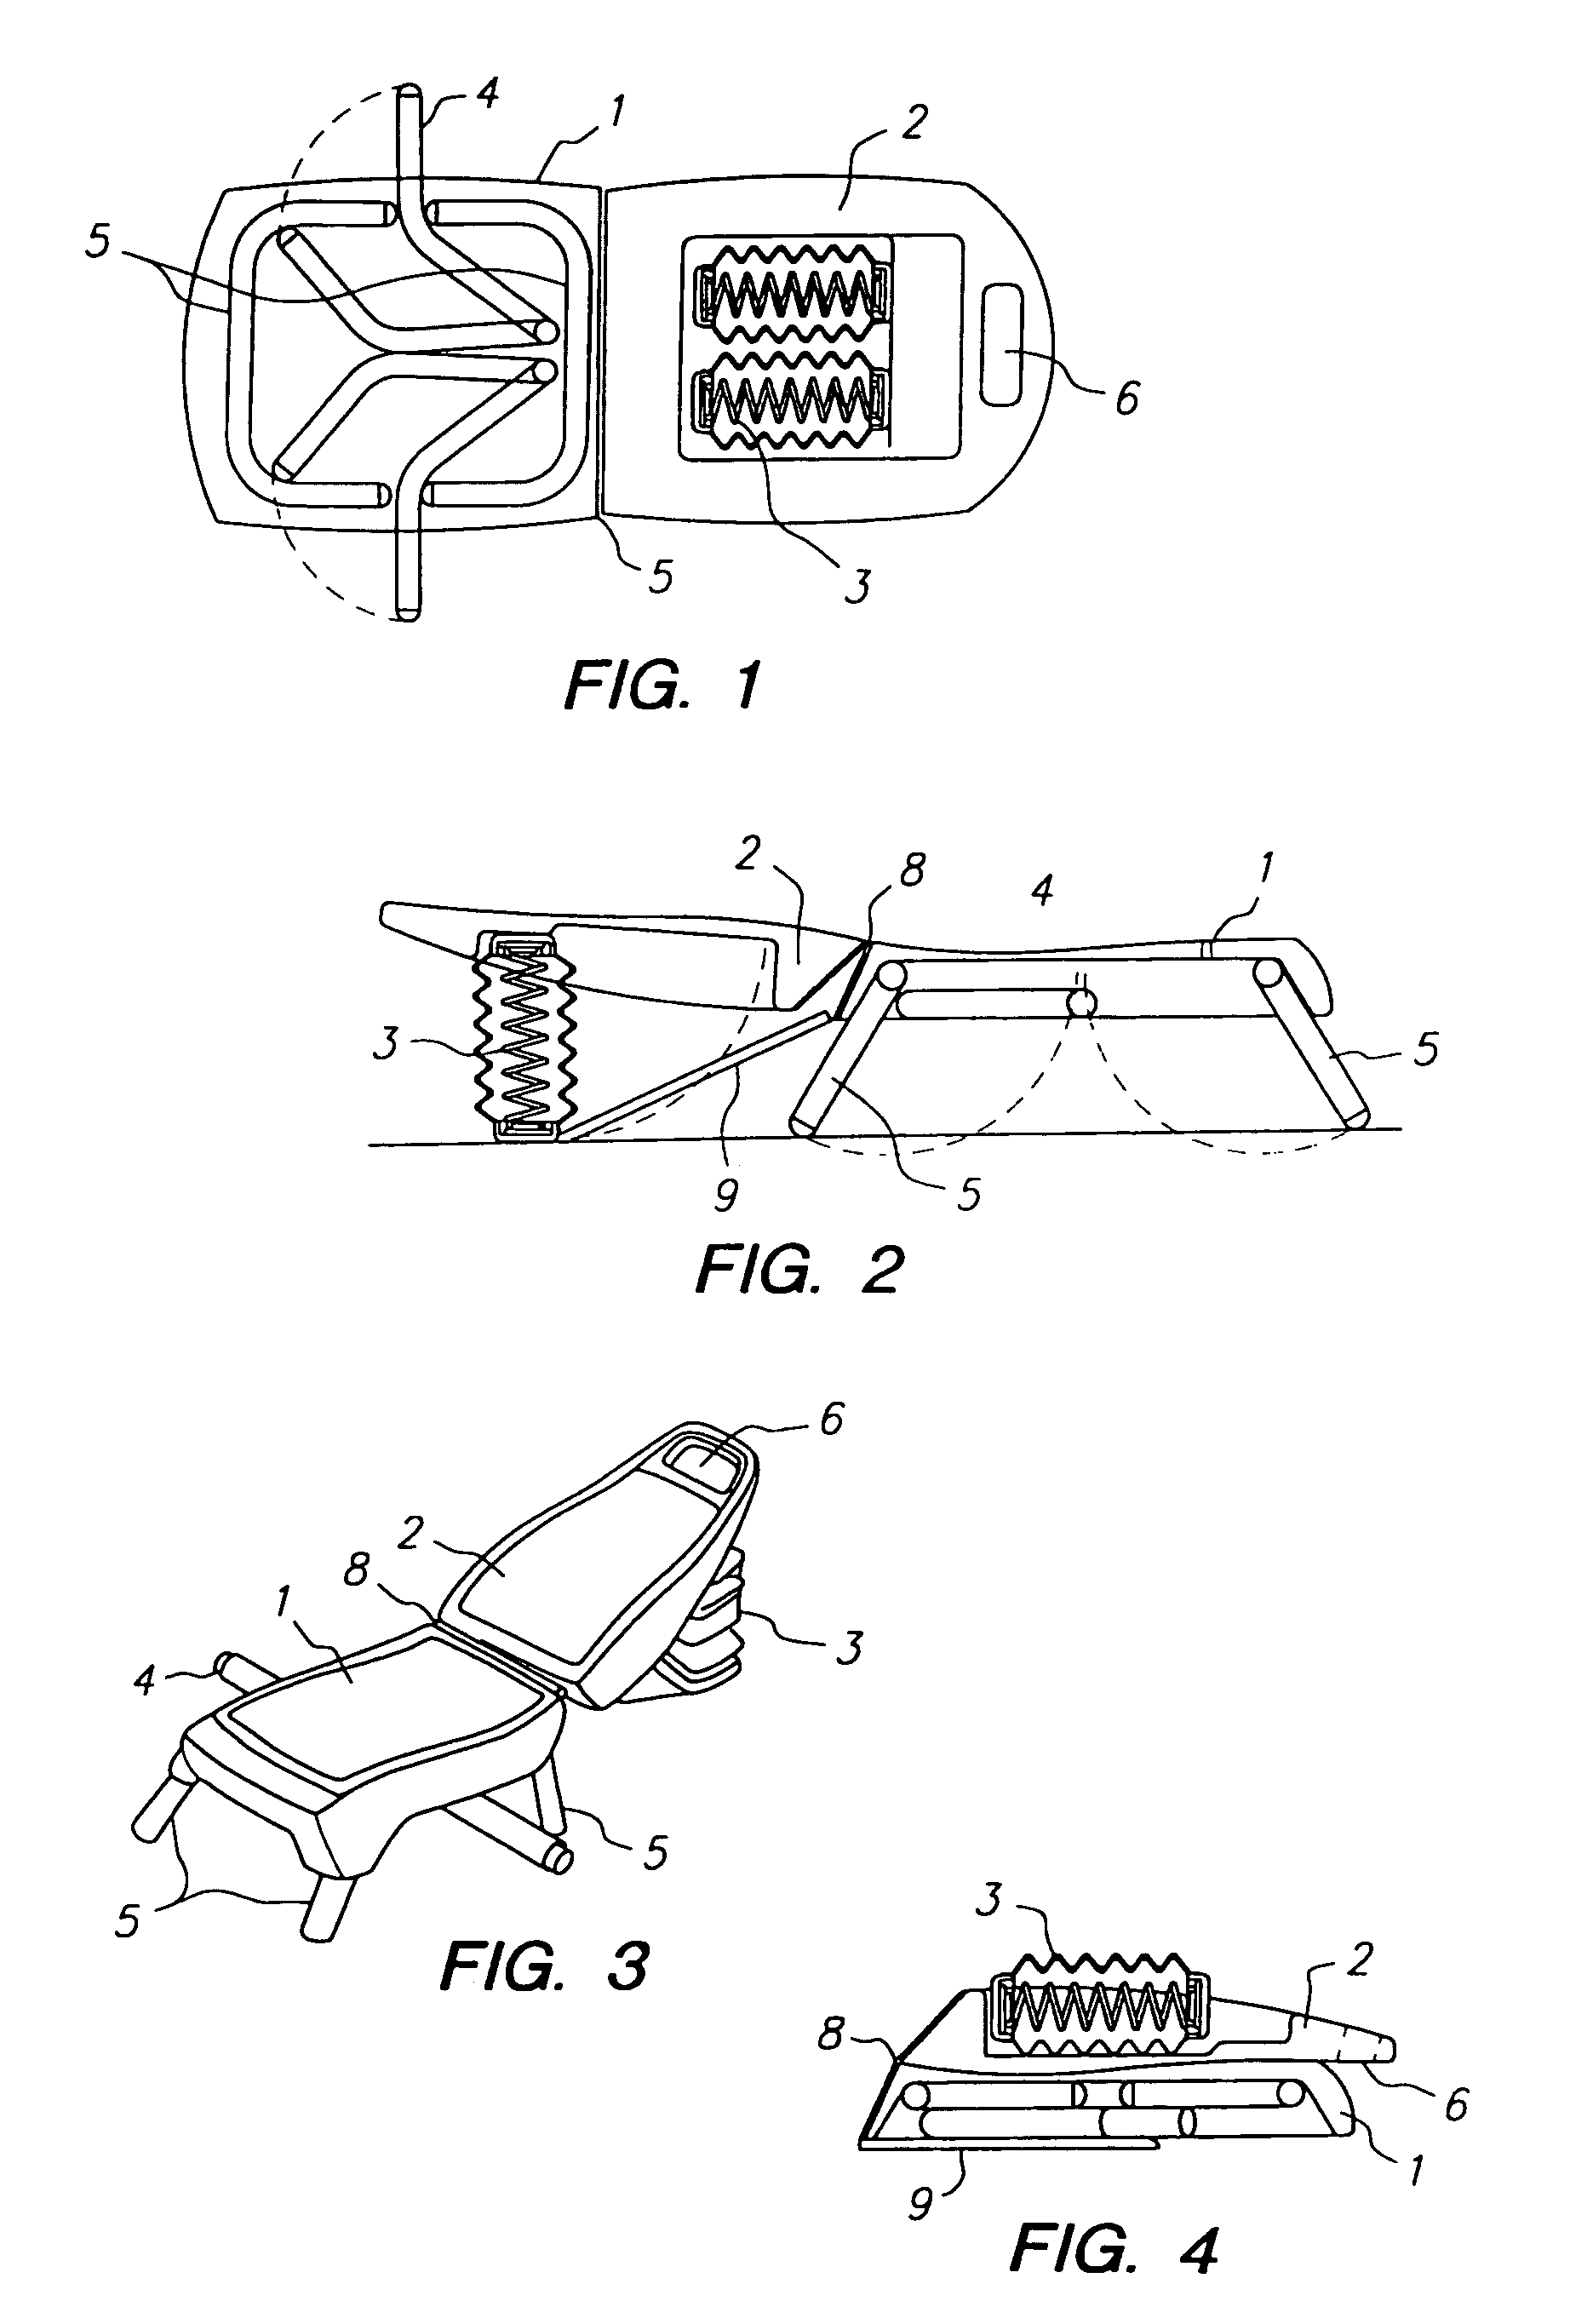 Apparatus and methods for abdominal muscle and gluteal muscle exercise